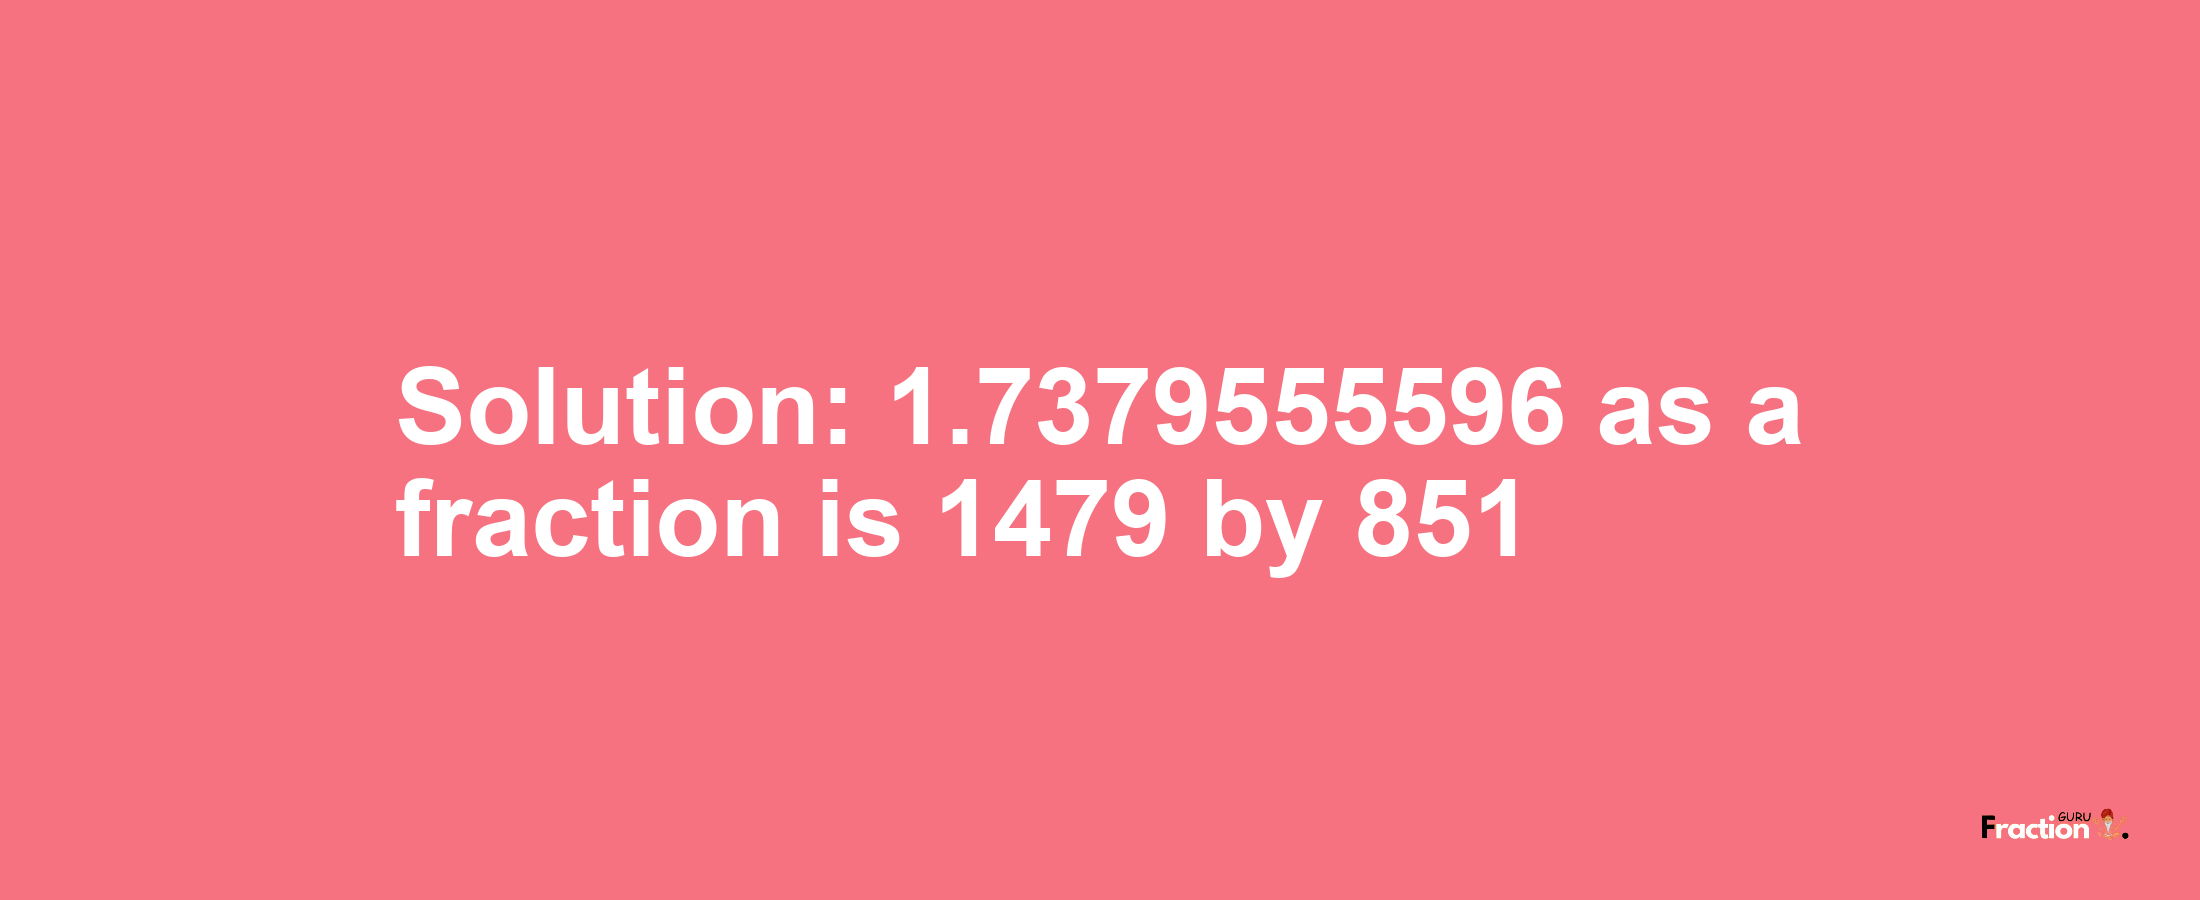 Solution:1.7379555596 as a fraction is 1479/851